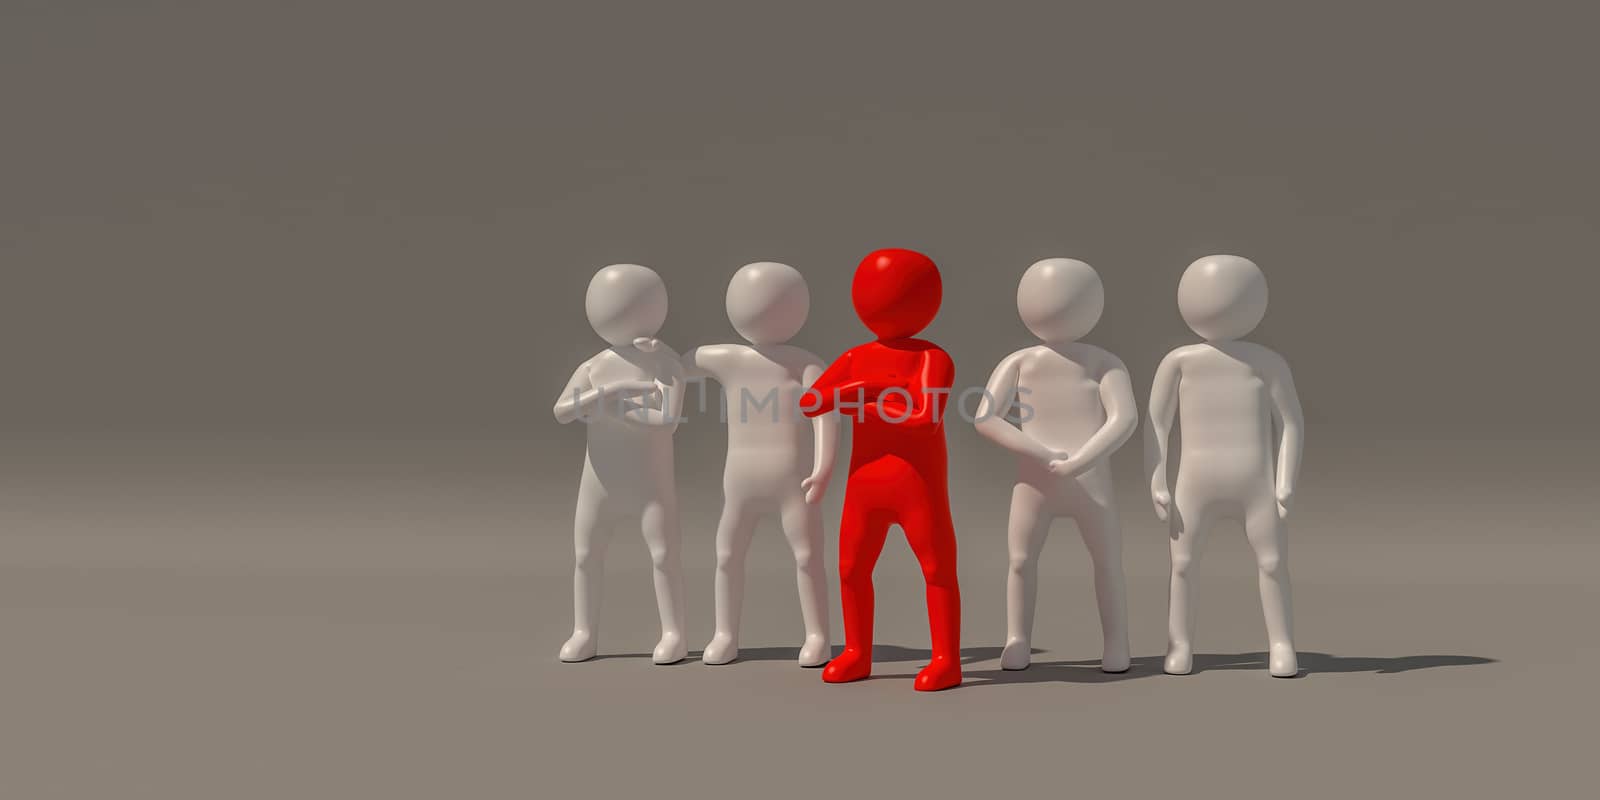 3d illustrator group of people symbols on gray background, 3d rendering of the playing football. Includes selection path.